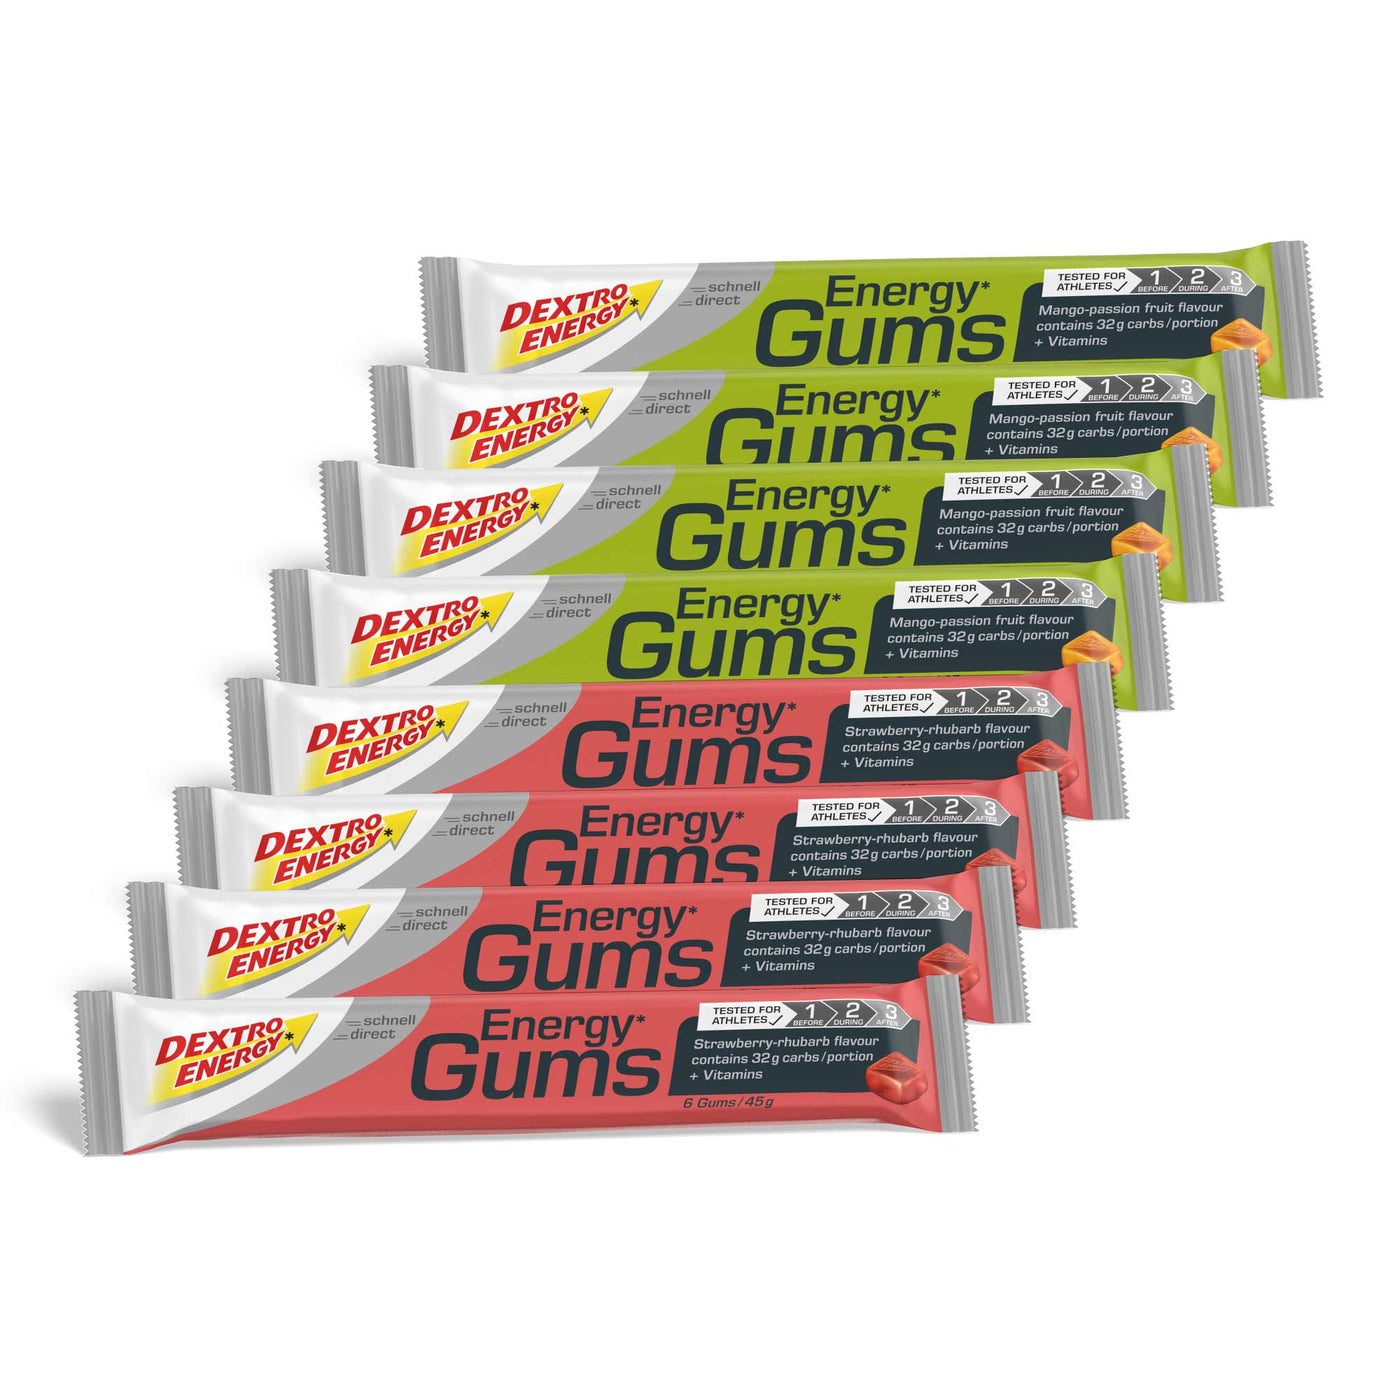 Trial pack Engergy* Gums - ONLINE EXCLUSIVE -